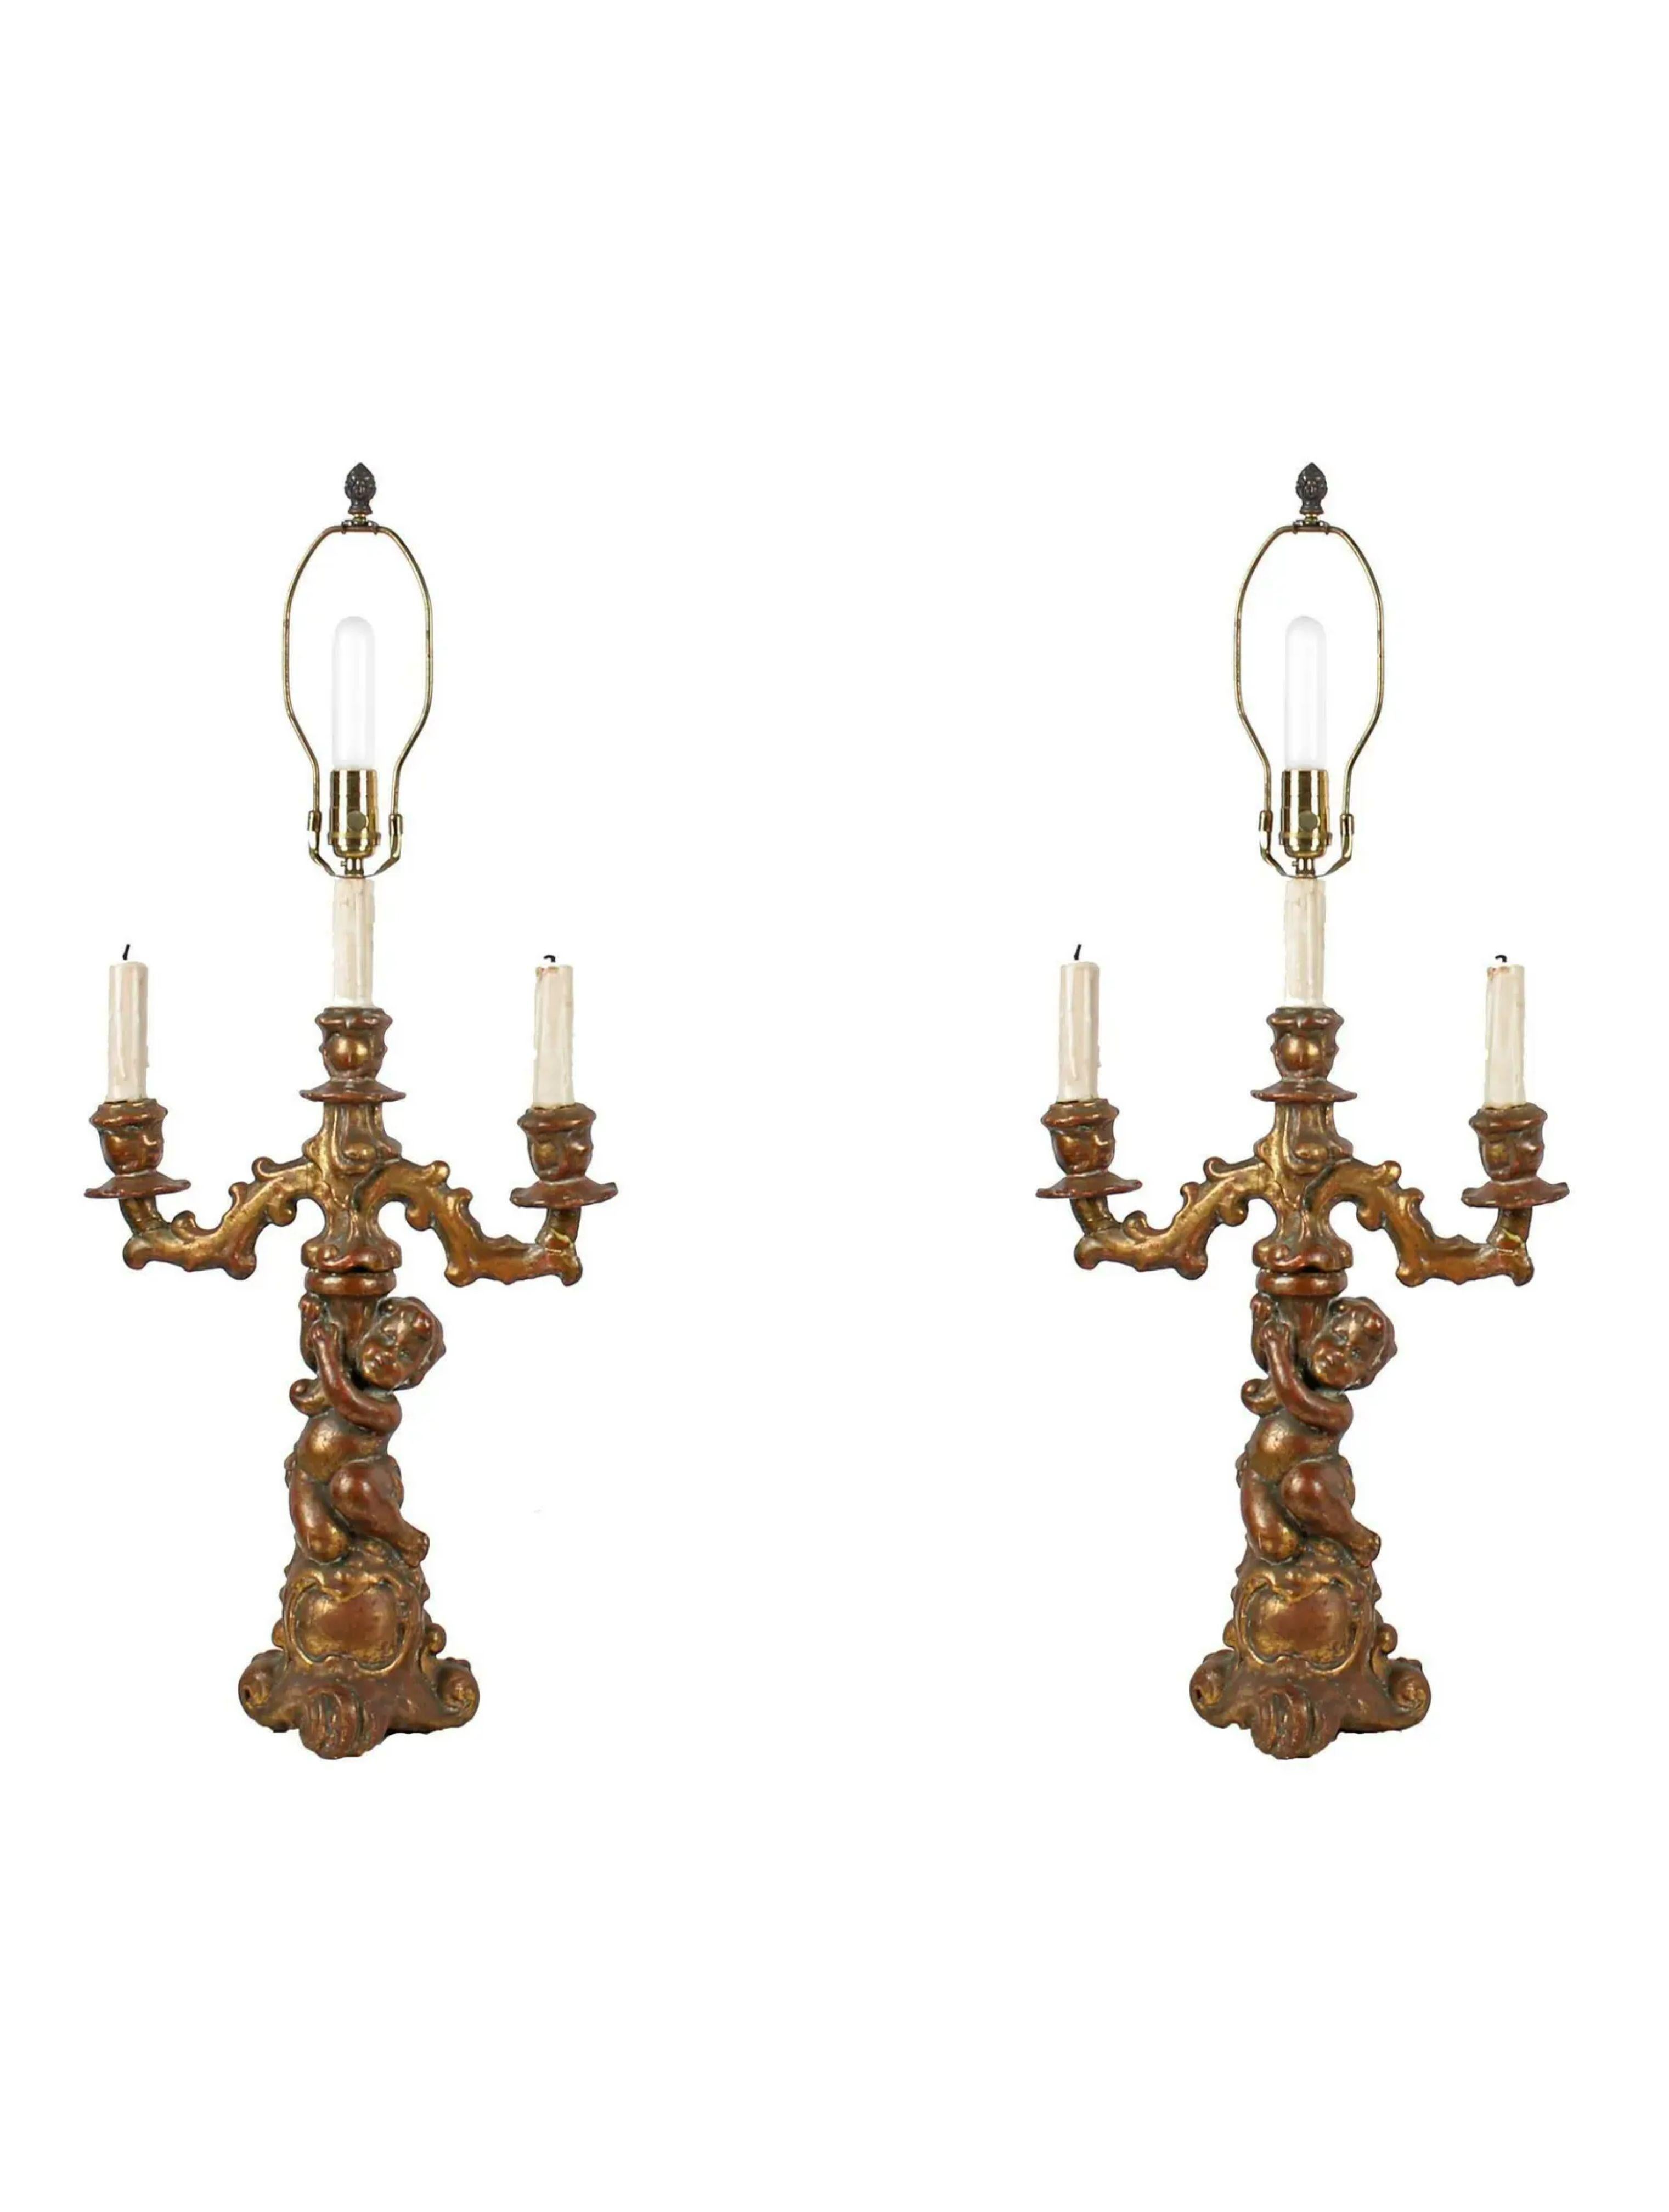 20th Century Pair of Antique Figural Nude Putti Gilt Wood Candelabra Table Lamp For Sale